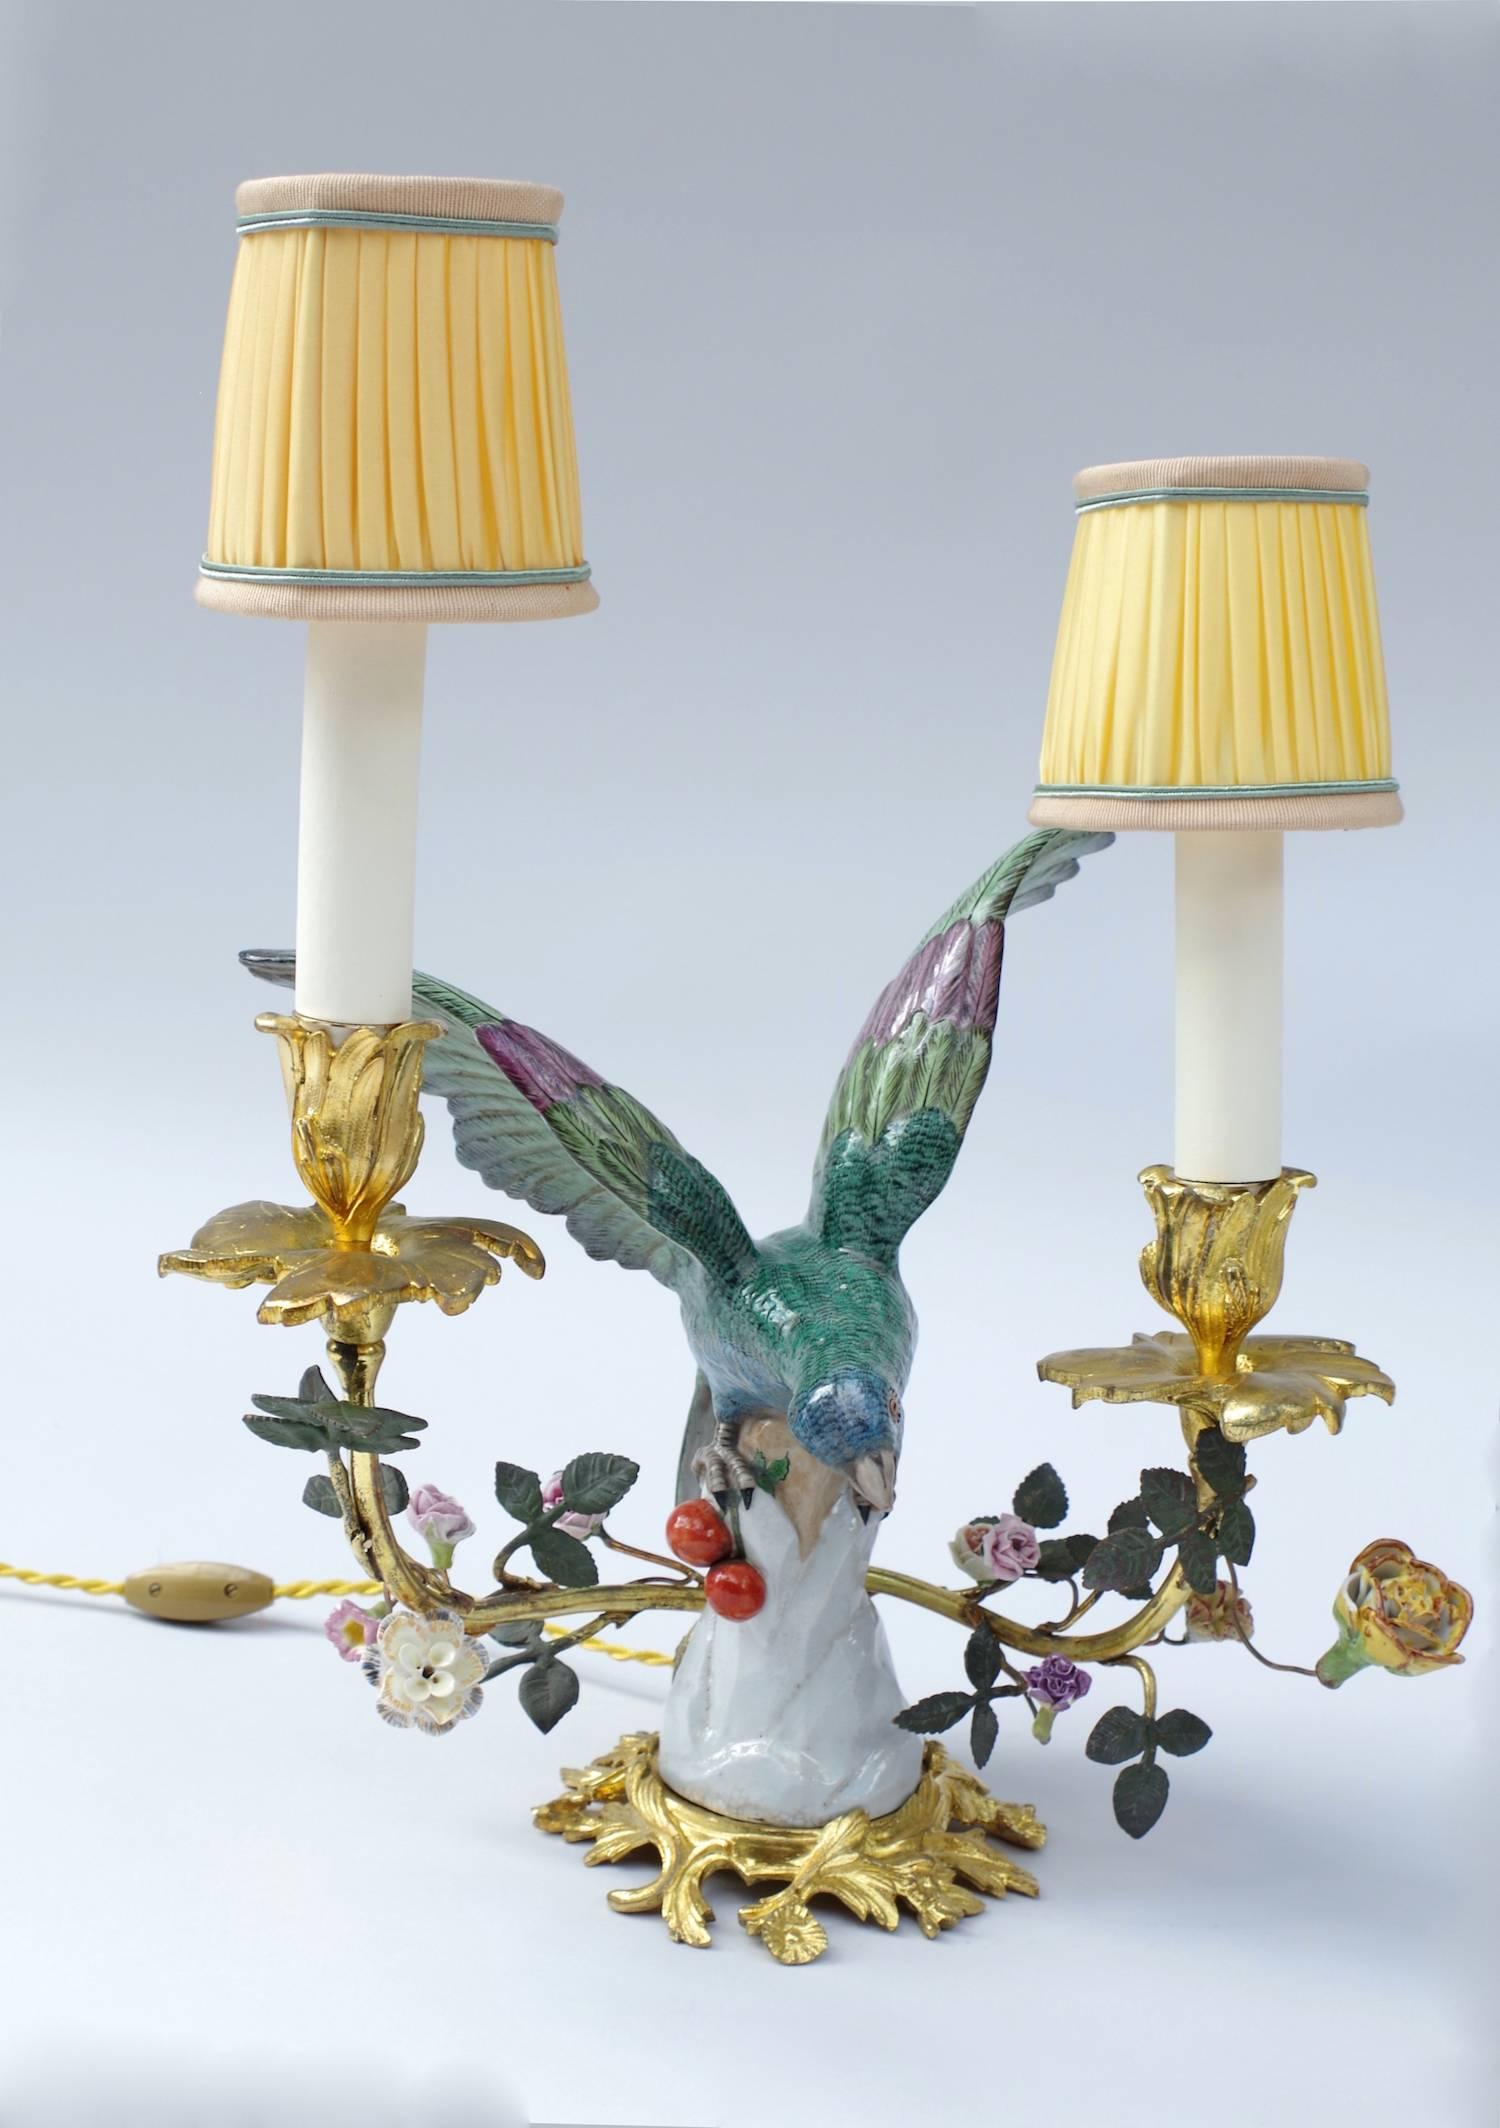 Pair of two lights porcelain lamps, representing two budgies with deployed wings and perched on a naturalistic base. Retour ligne automatique
Rocaille style chiseled and gilt bronze mount. The two birds are framed with floral decoration on the bras